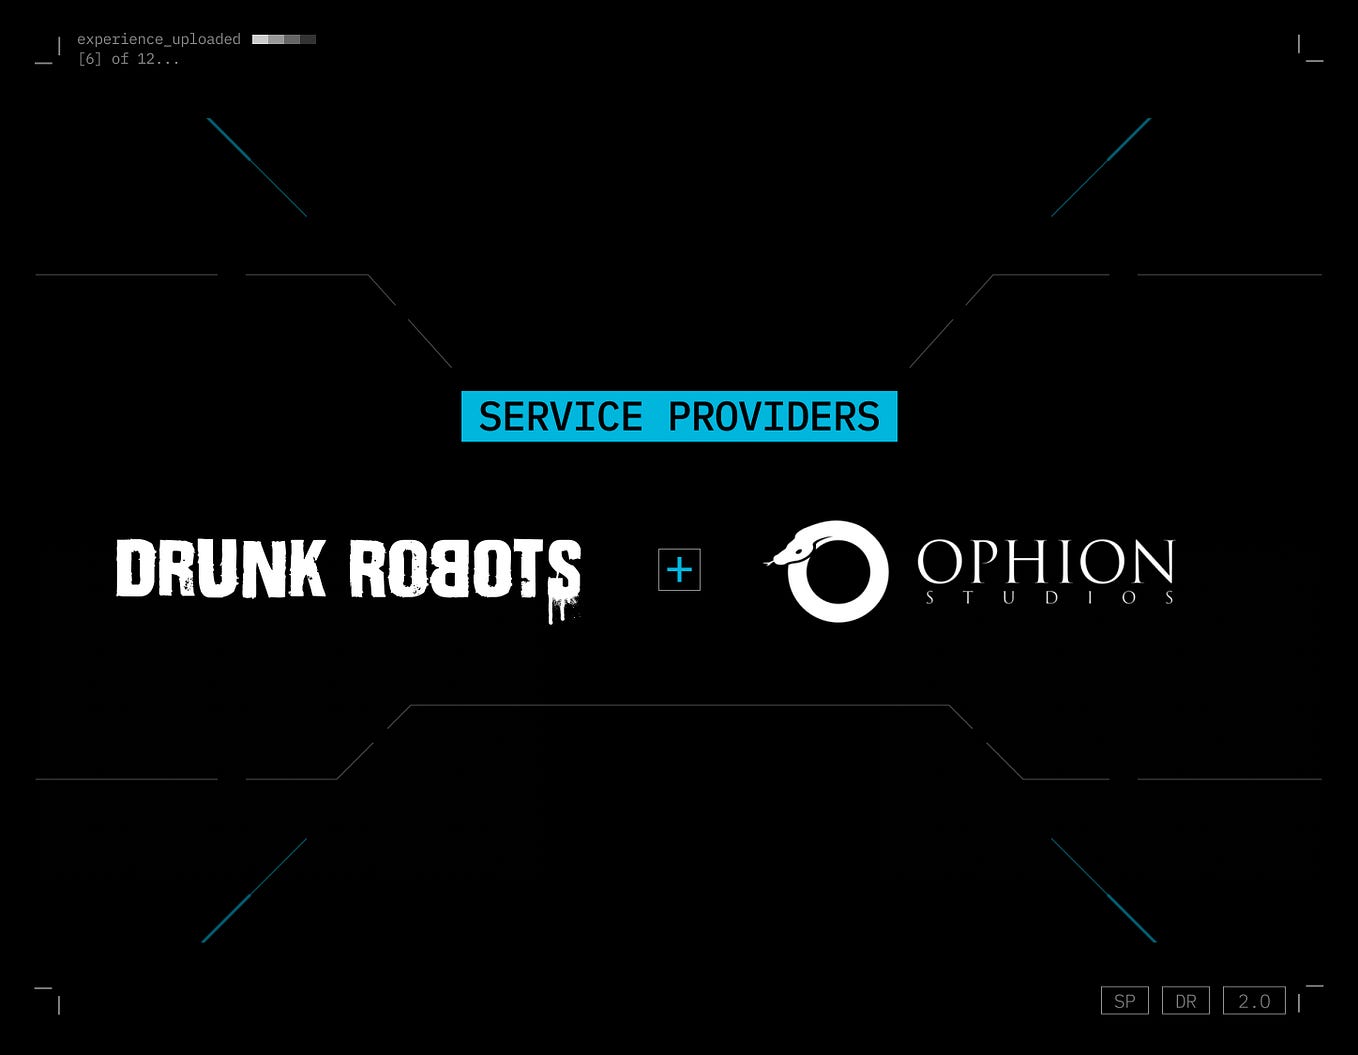 Ophion Studios is one of our 3D service providers.